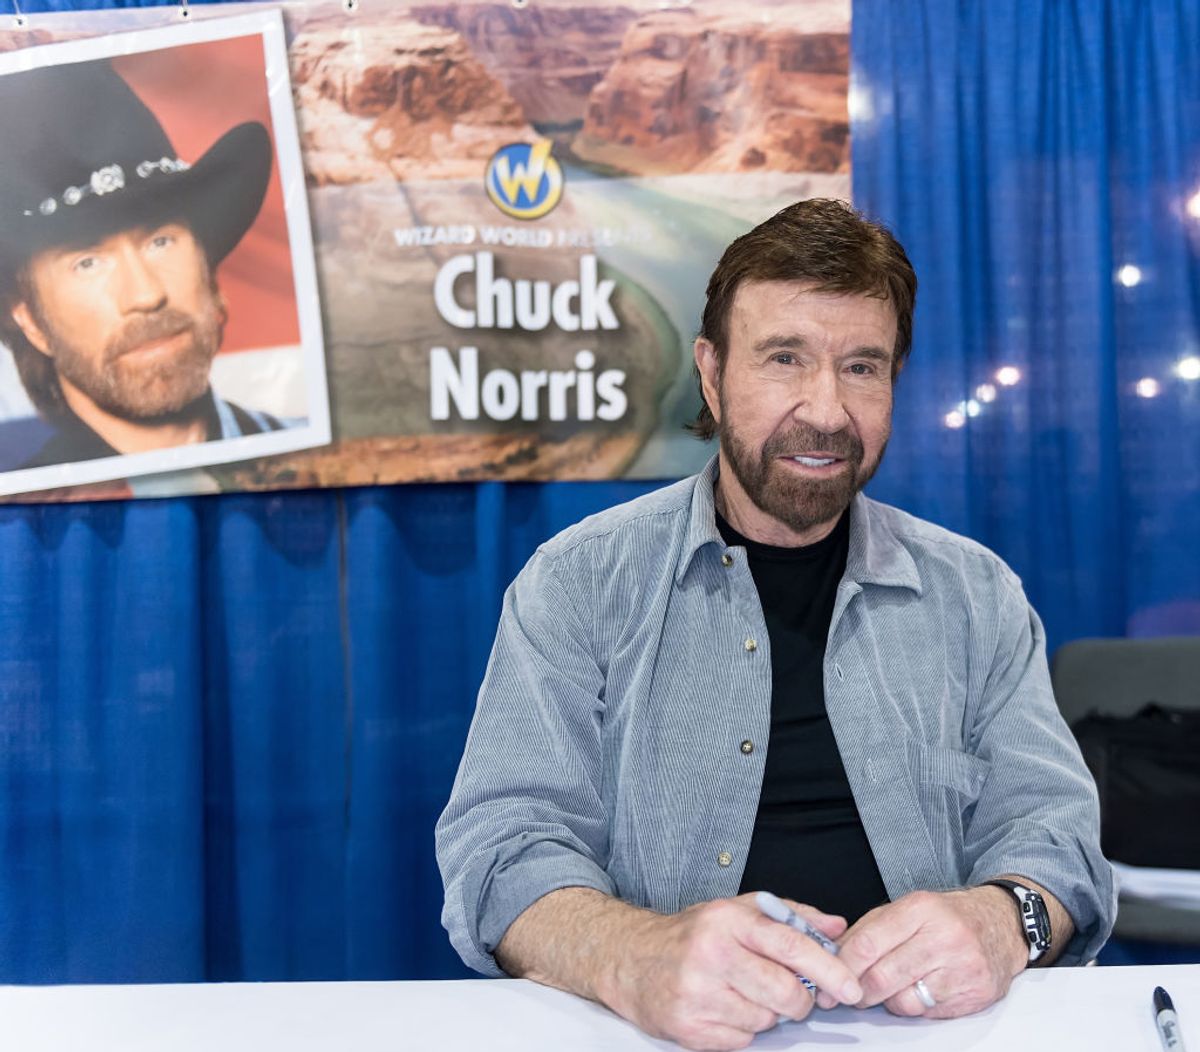 PHILADELPHIA, PA - JUNE 03:  Martial artist/actor Chuck Norris make his Wizard World Comic Con debut during Wizard World Comic Con Philadelphia 2017 - Day 3 at Pennsylvania Convention Center on June 3, 2017 in Philadelphia, Pennsylvania.  (Photo by Gilbert Carrasquillo/Getty Images) (Getty Images/Stock photo)